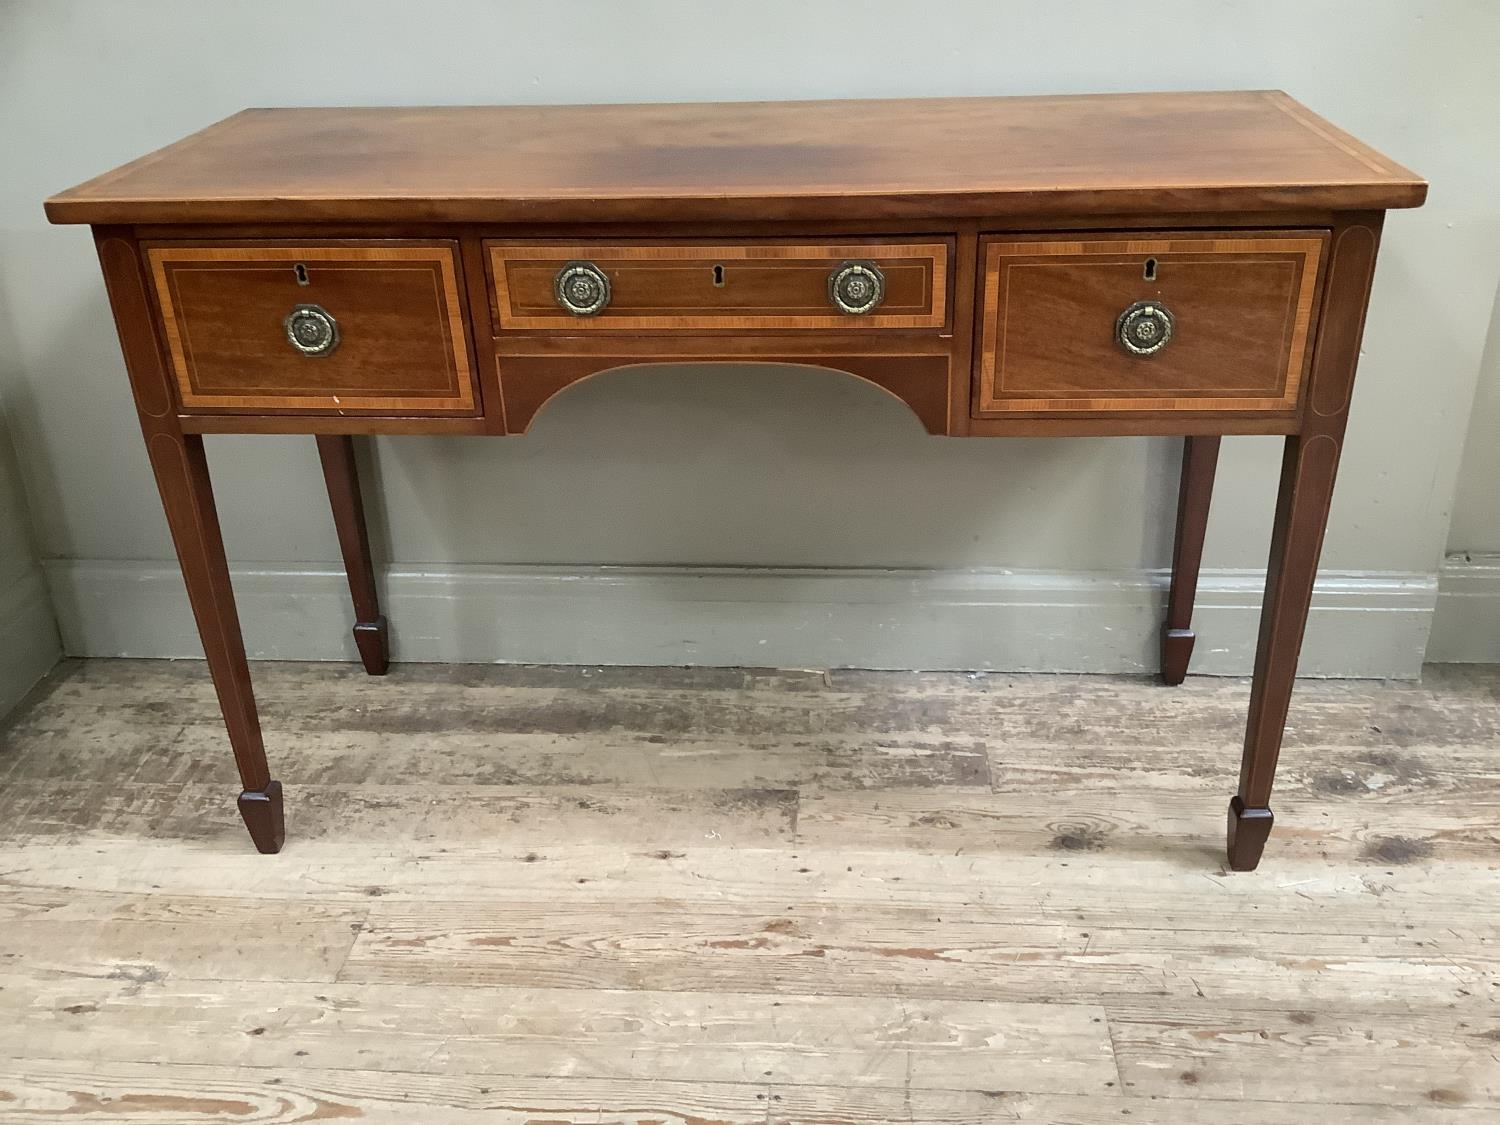 An early 20th century mahogany cross banded sideboard with one long drawer flanked by two short